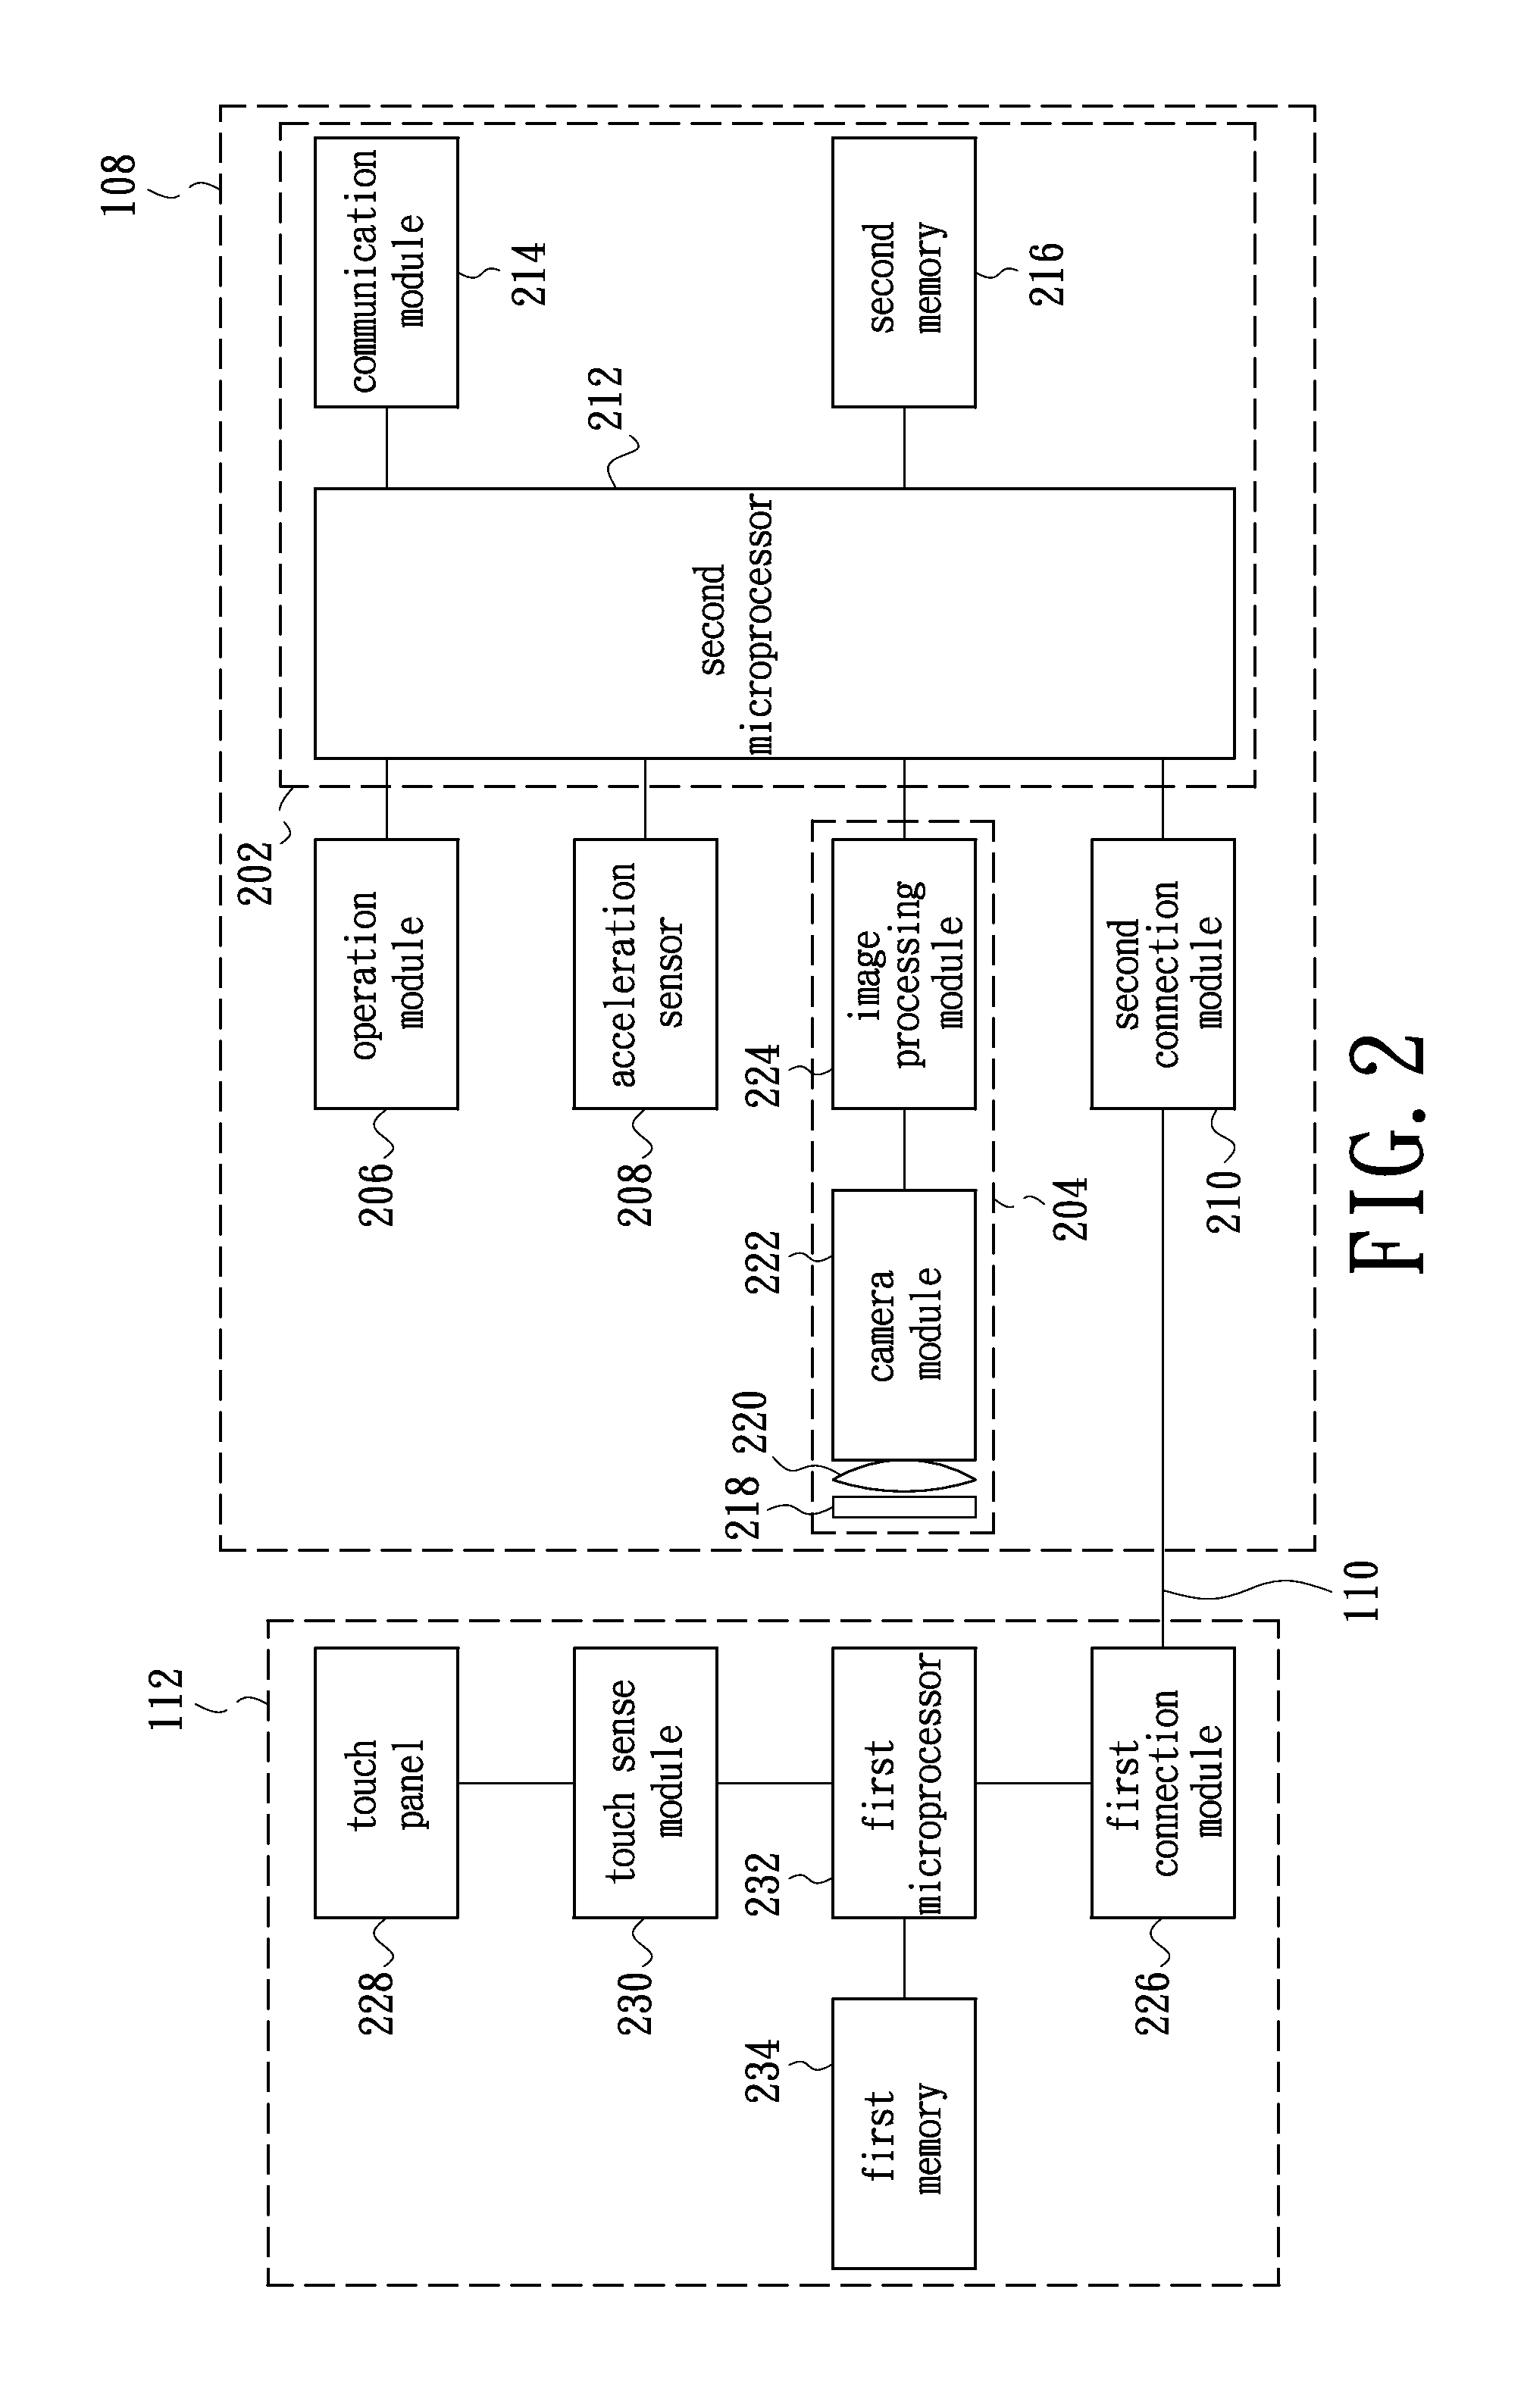 Two-dimensional input device, control device and interactive game system